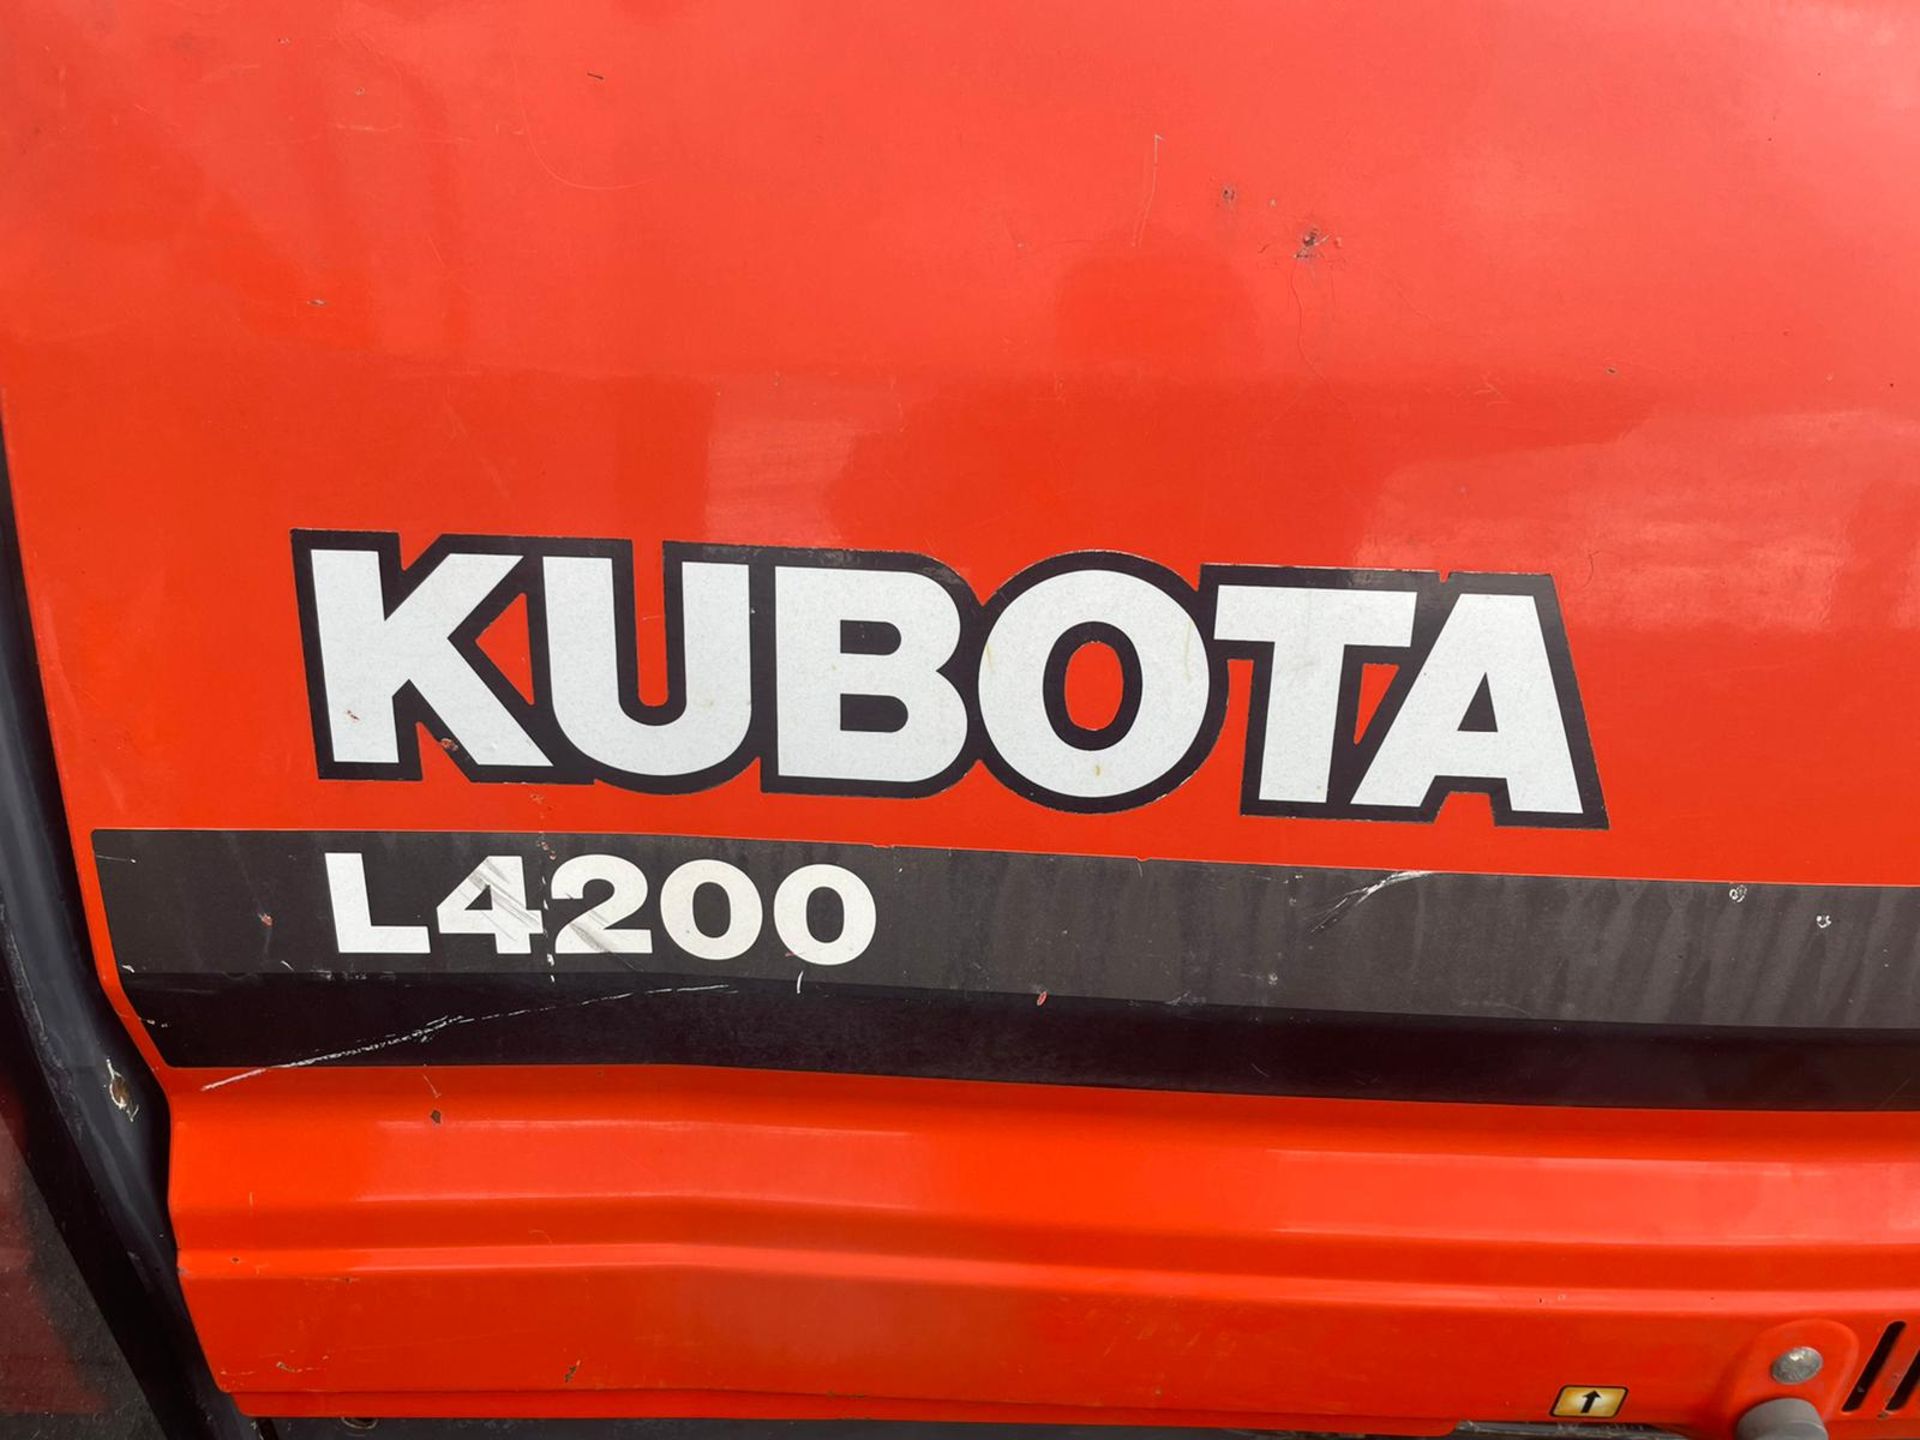 KUBOTA L4200 COMPACT TRACTOR, RUNS AND DRIVES, 45HP, GRASS TYRES, CABBED, 3 POINT LINKAGE *PLUS VAT* - Image 11 of 11